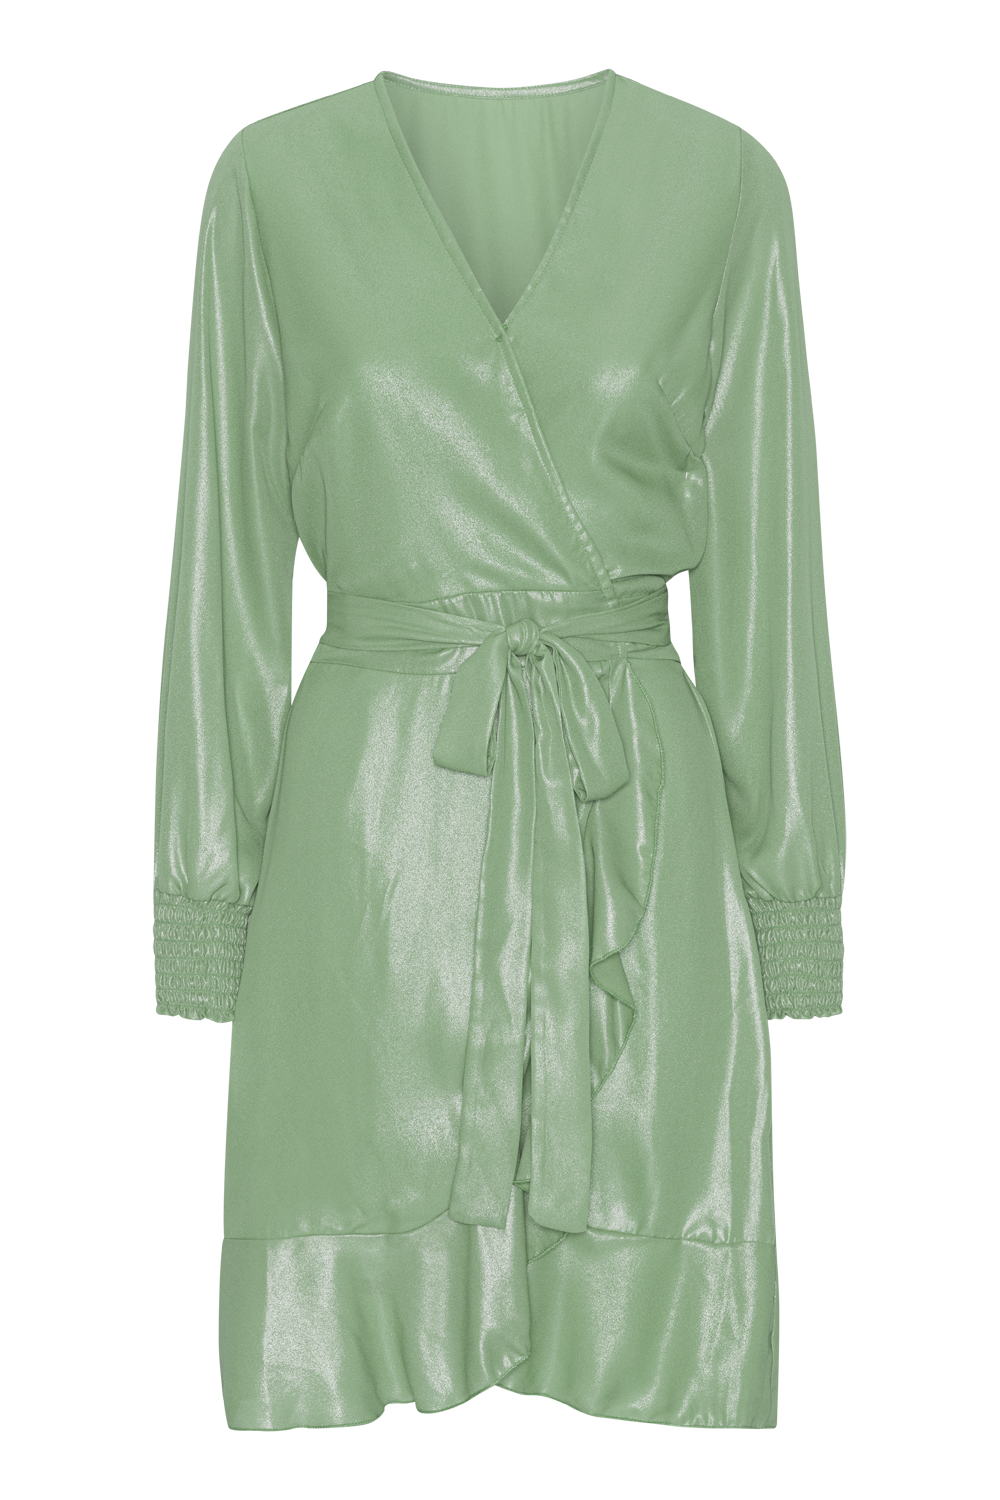 Milly LS Shimmer Wrap Dress Green